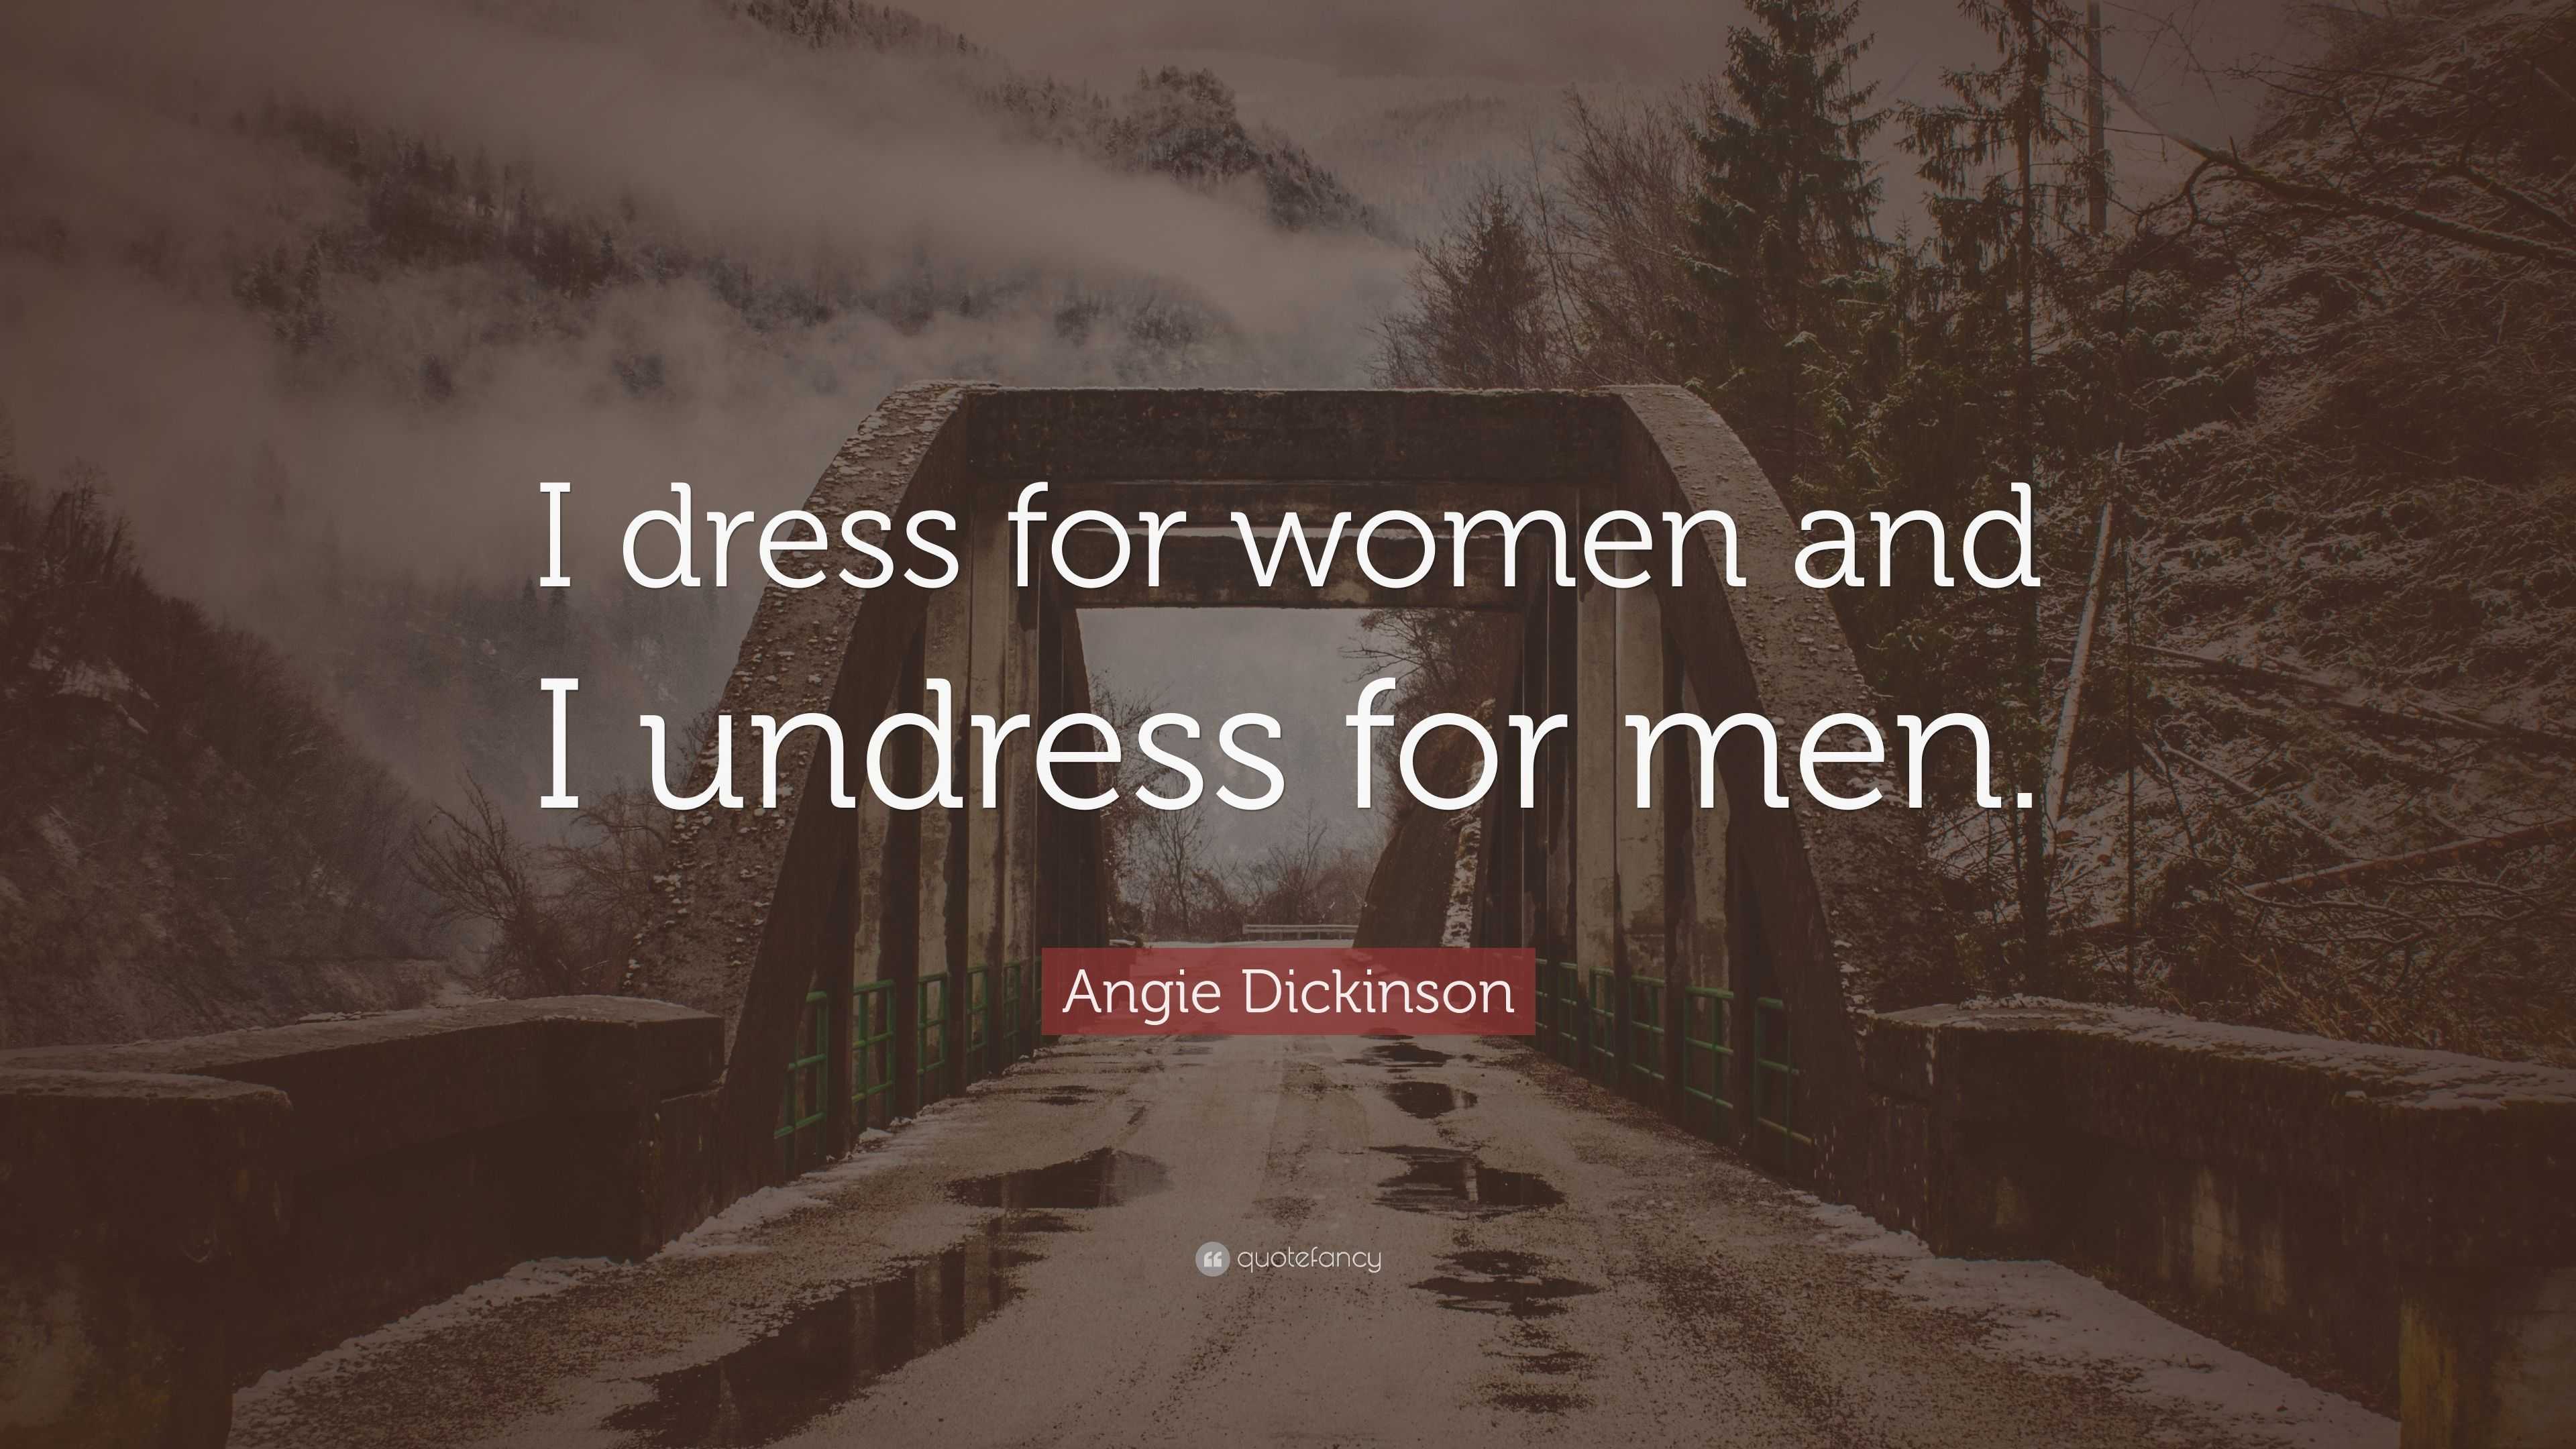 Angie Dickinson Quote “i Dress For Women And I Undress For Men”